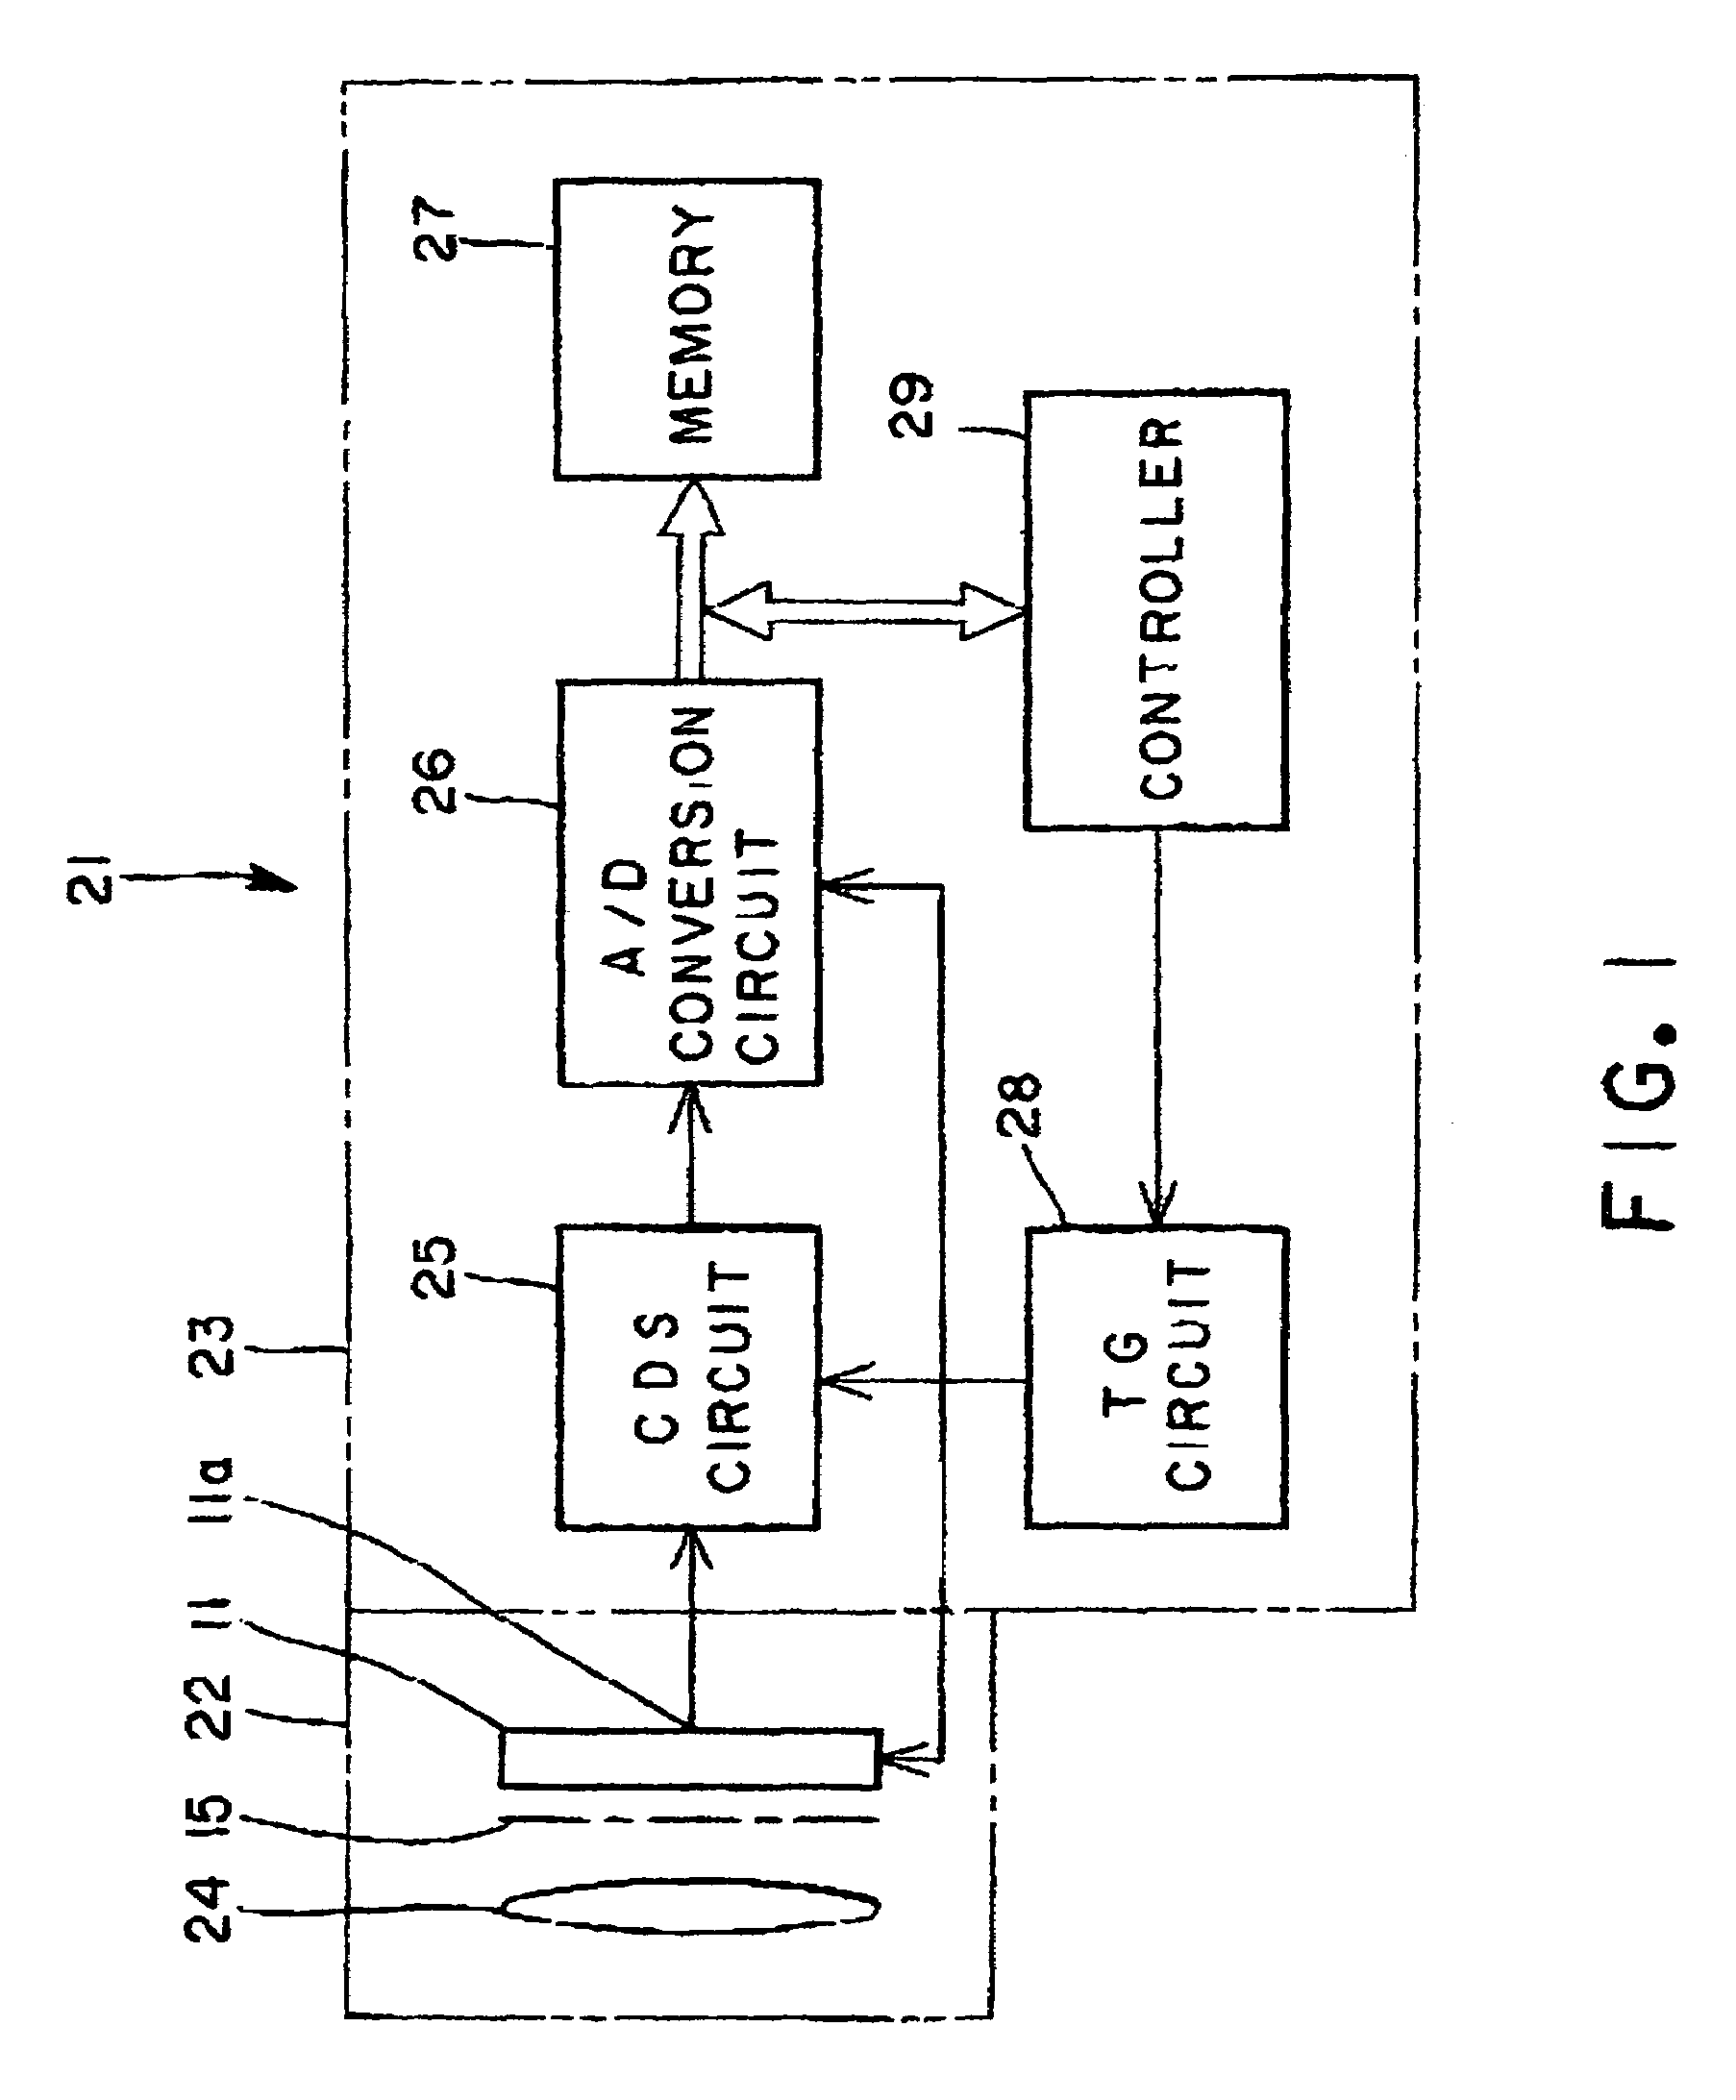 Solid image capturing device, lens unit and image capturing apparatus including an optical mask for storing characteristic data